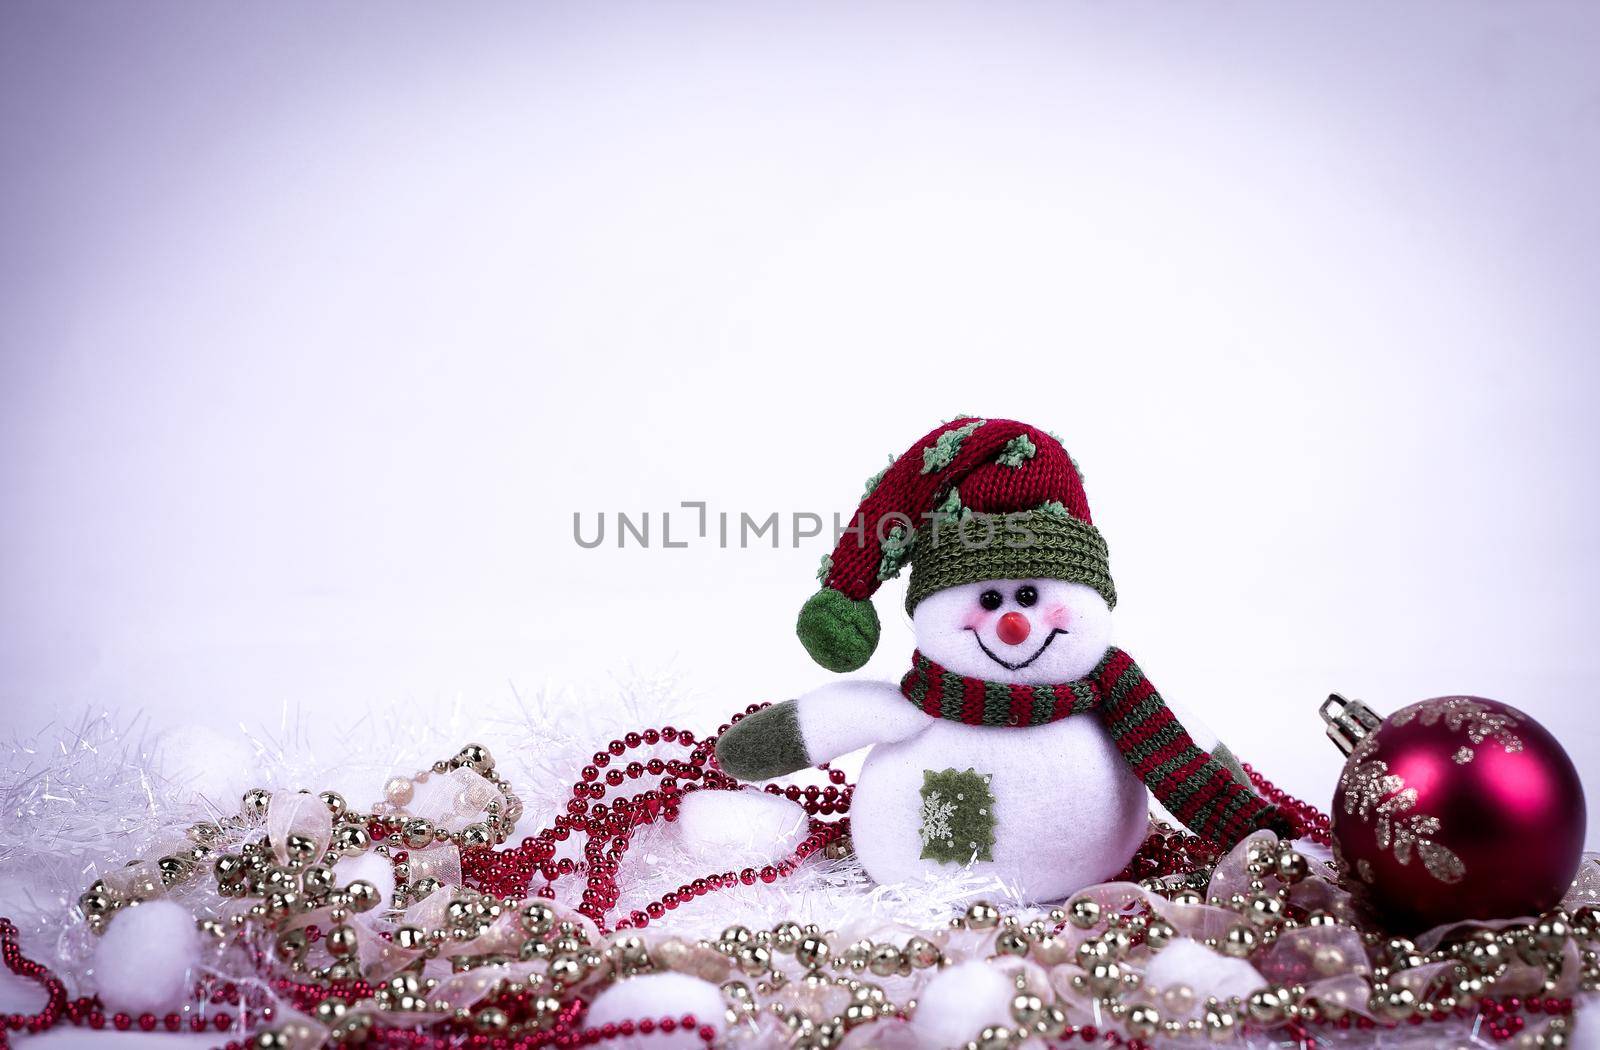 cute toy snowman and various Christmas decorations on a white background.photo with copy space